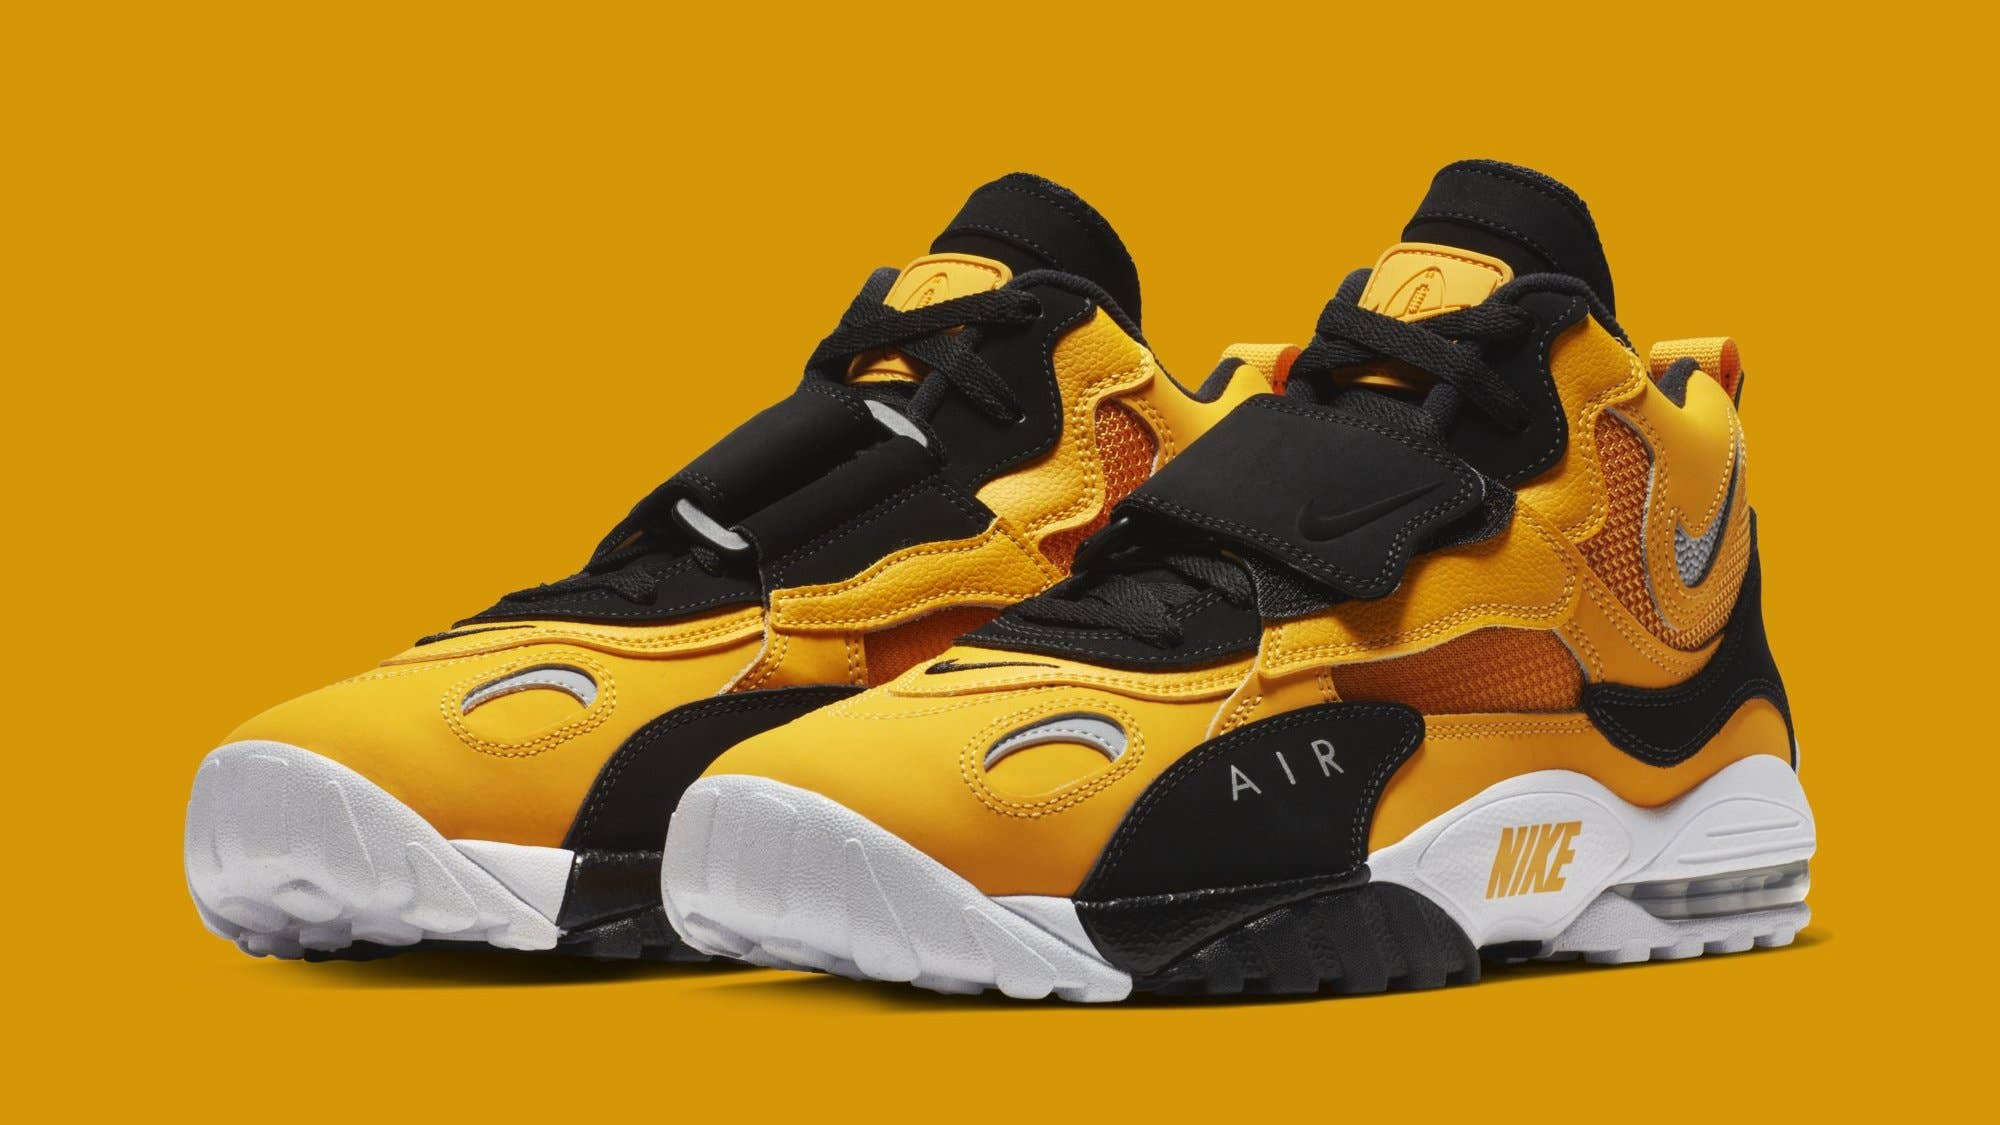 Outfits the Air Max Speed Turf in Colors | Complex